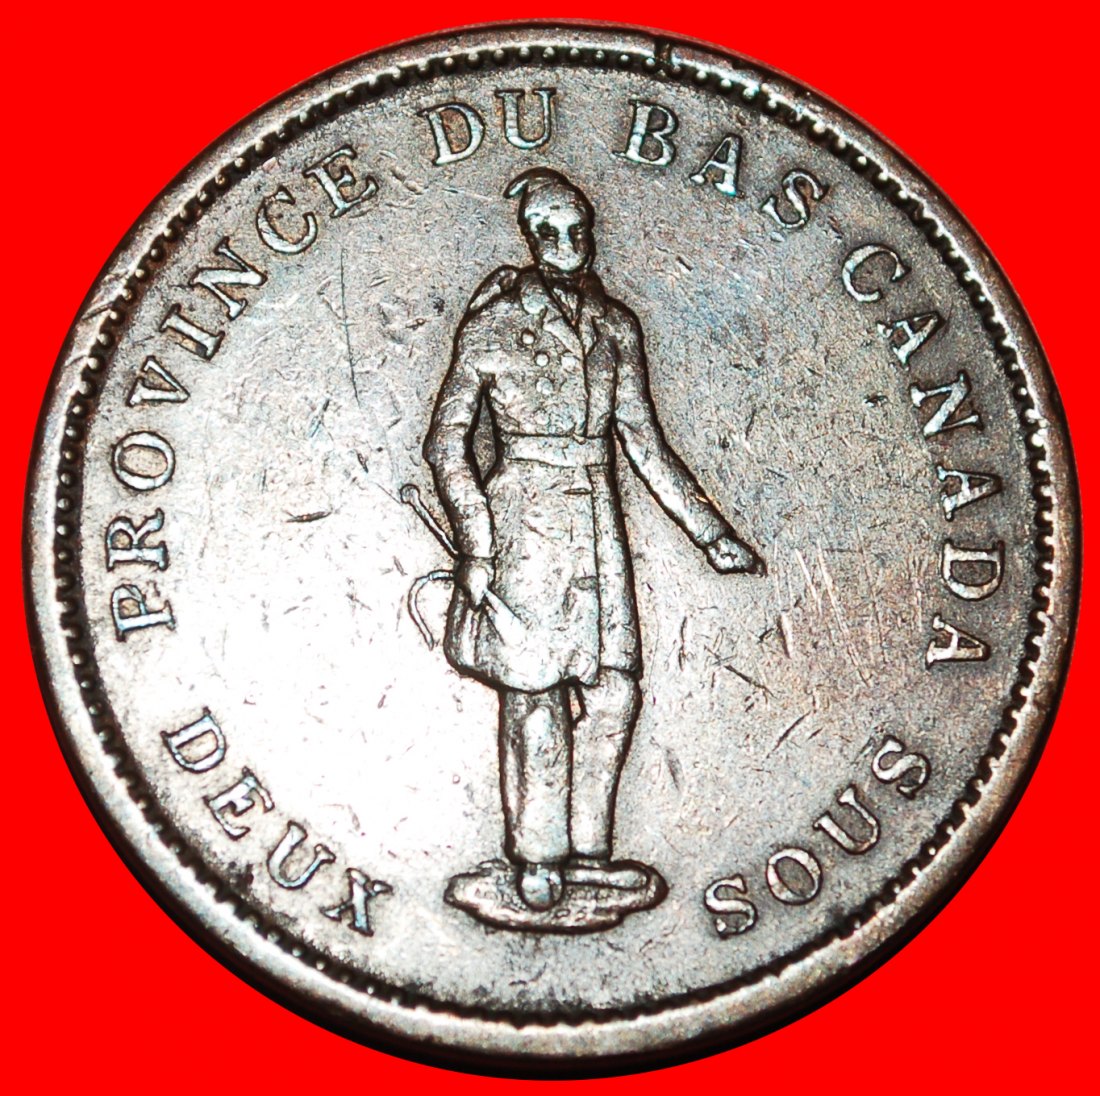  * BEAVER: LOWER CANADA ★ QUEBEC 2 SOU - 1 PENNY 1837 UNCOMMON! LOW START ★ NO RESERVE!   